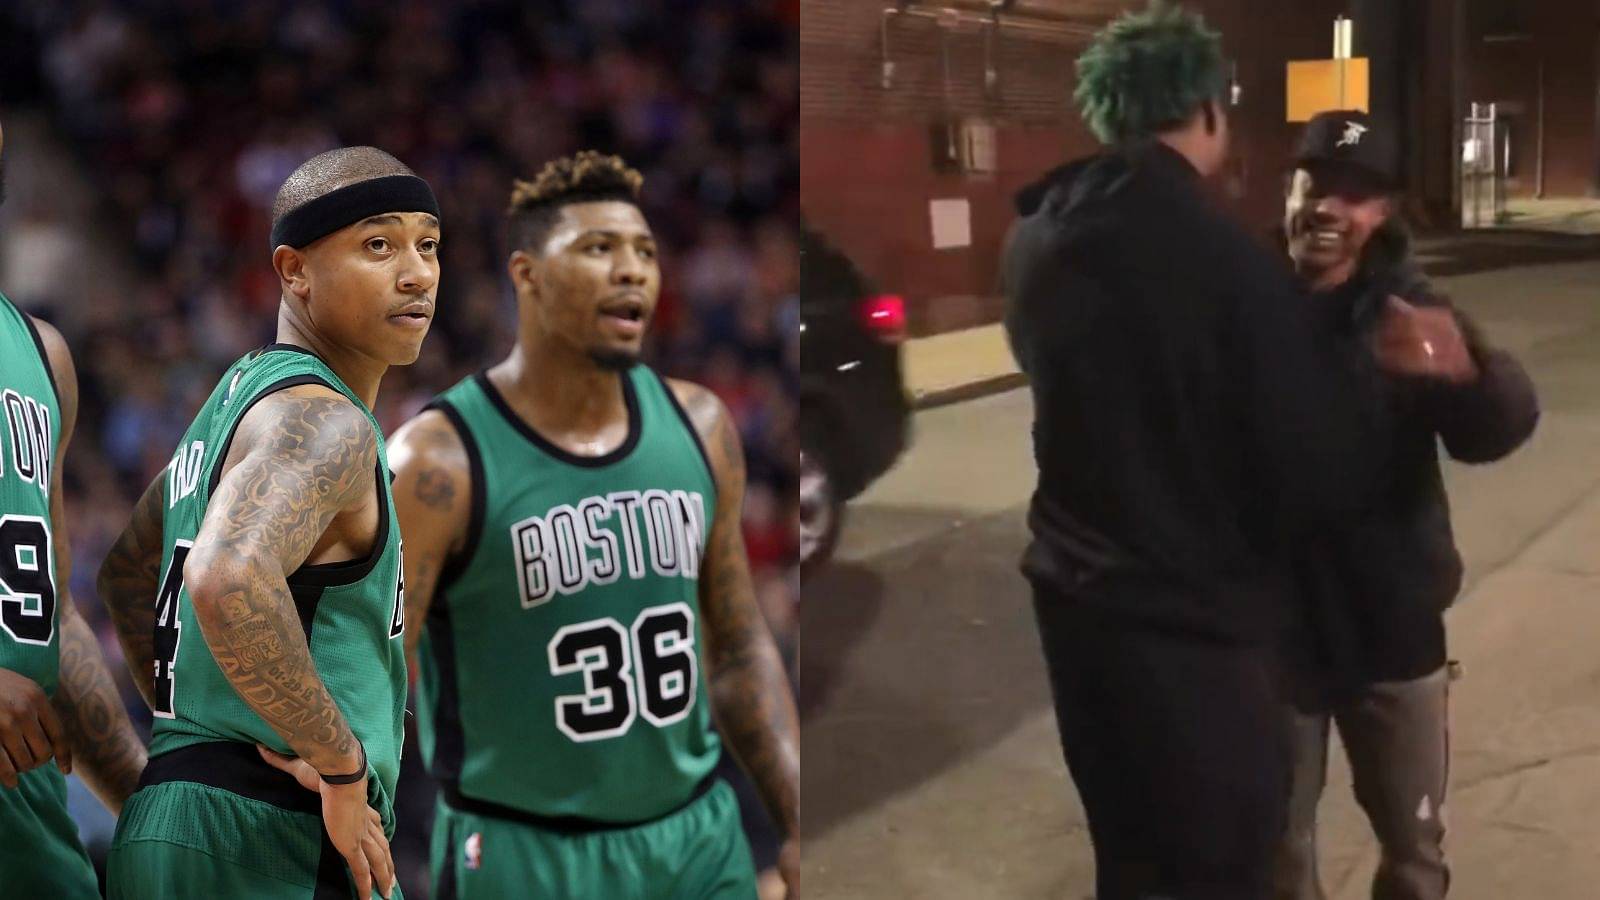 WATCH: Marcus Smart Embraces Former Teammate and 2017 MVP Candidate, Isaiah Thomas, Who is Now a Free Agent